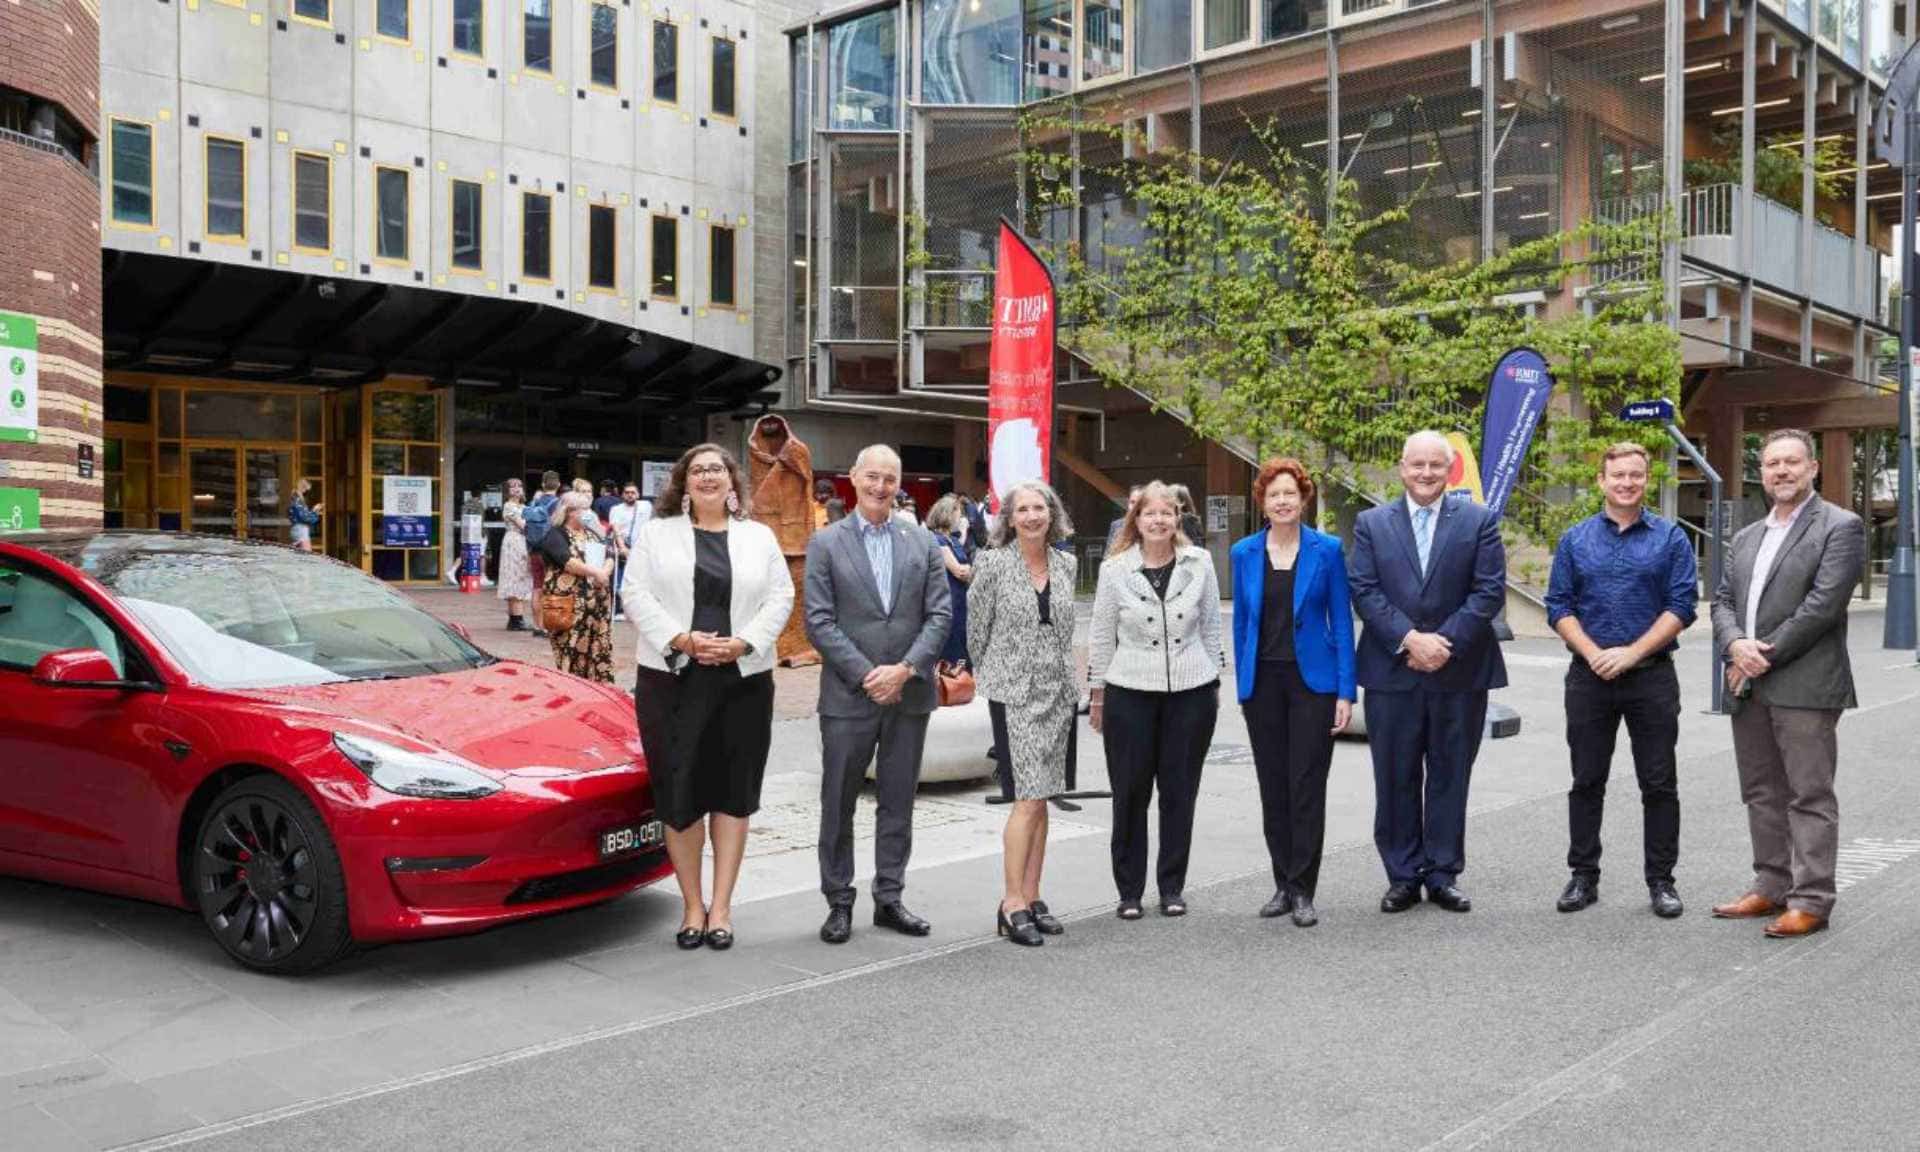 Group of people wearing corporate clothes next to a car on RMIT campus